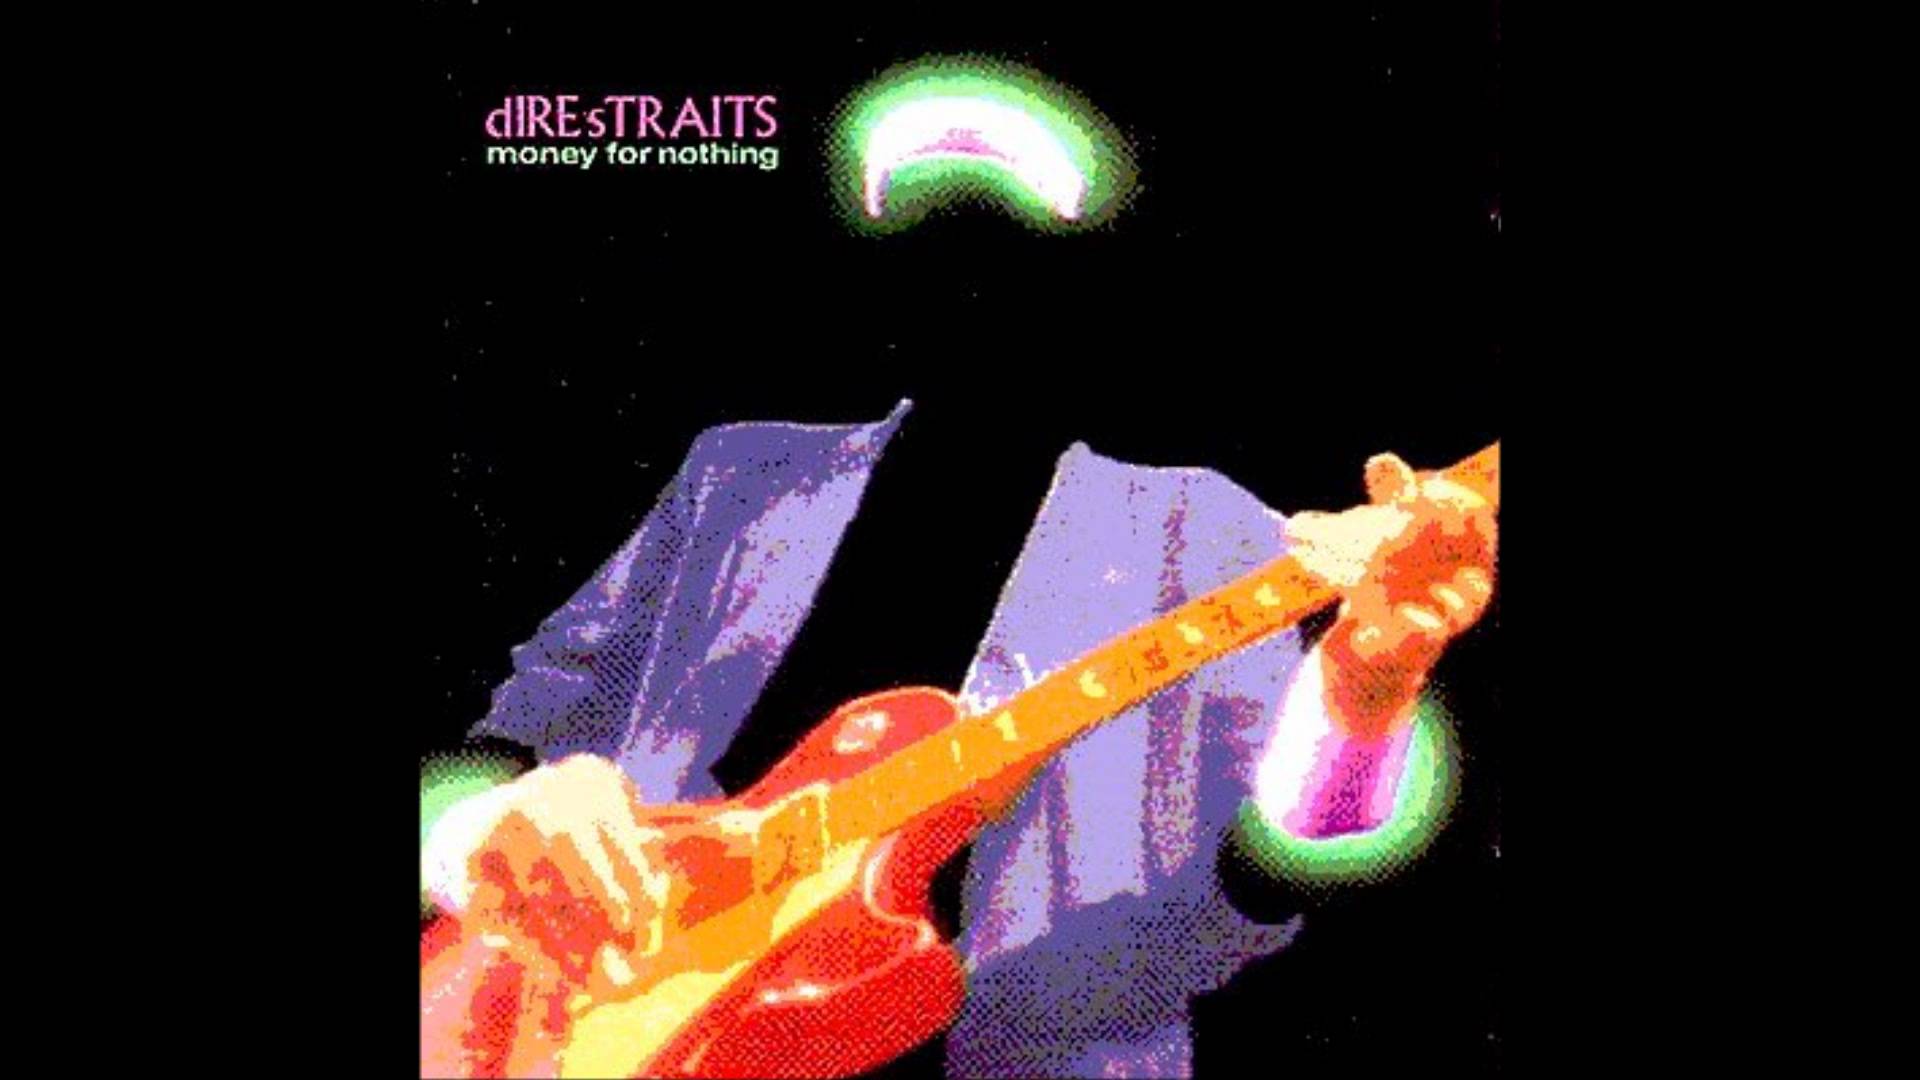 Dire Straits for Nothing